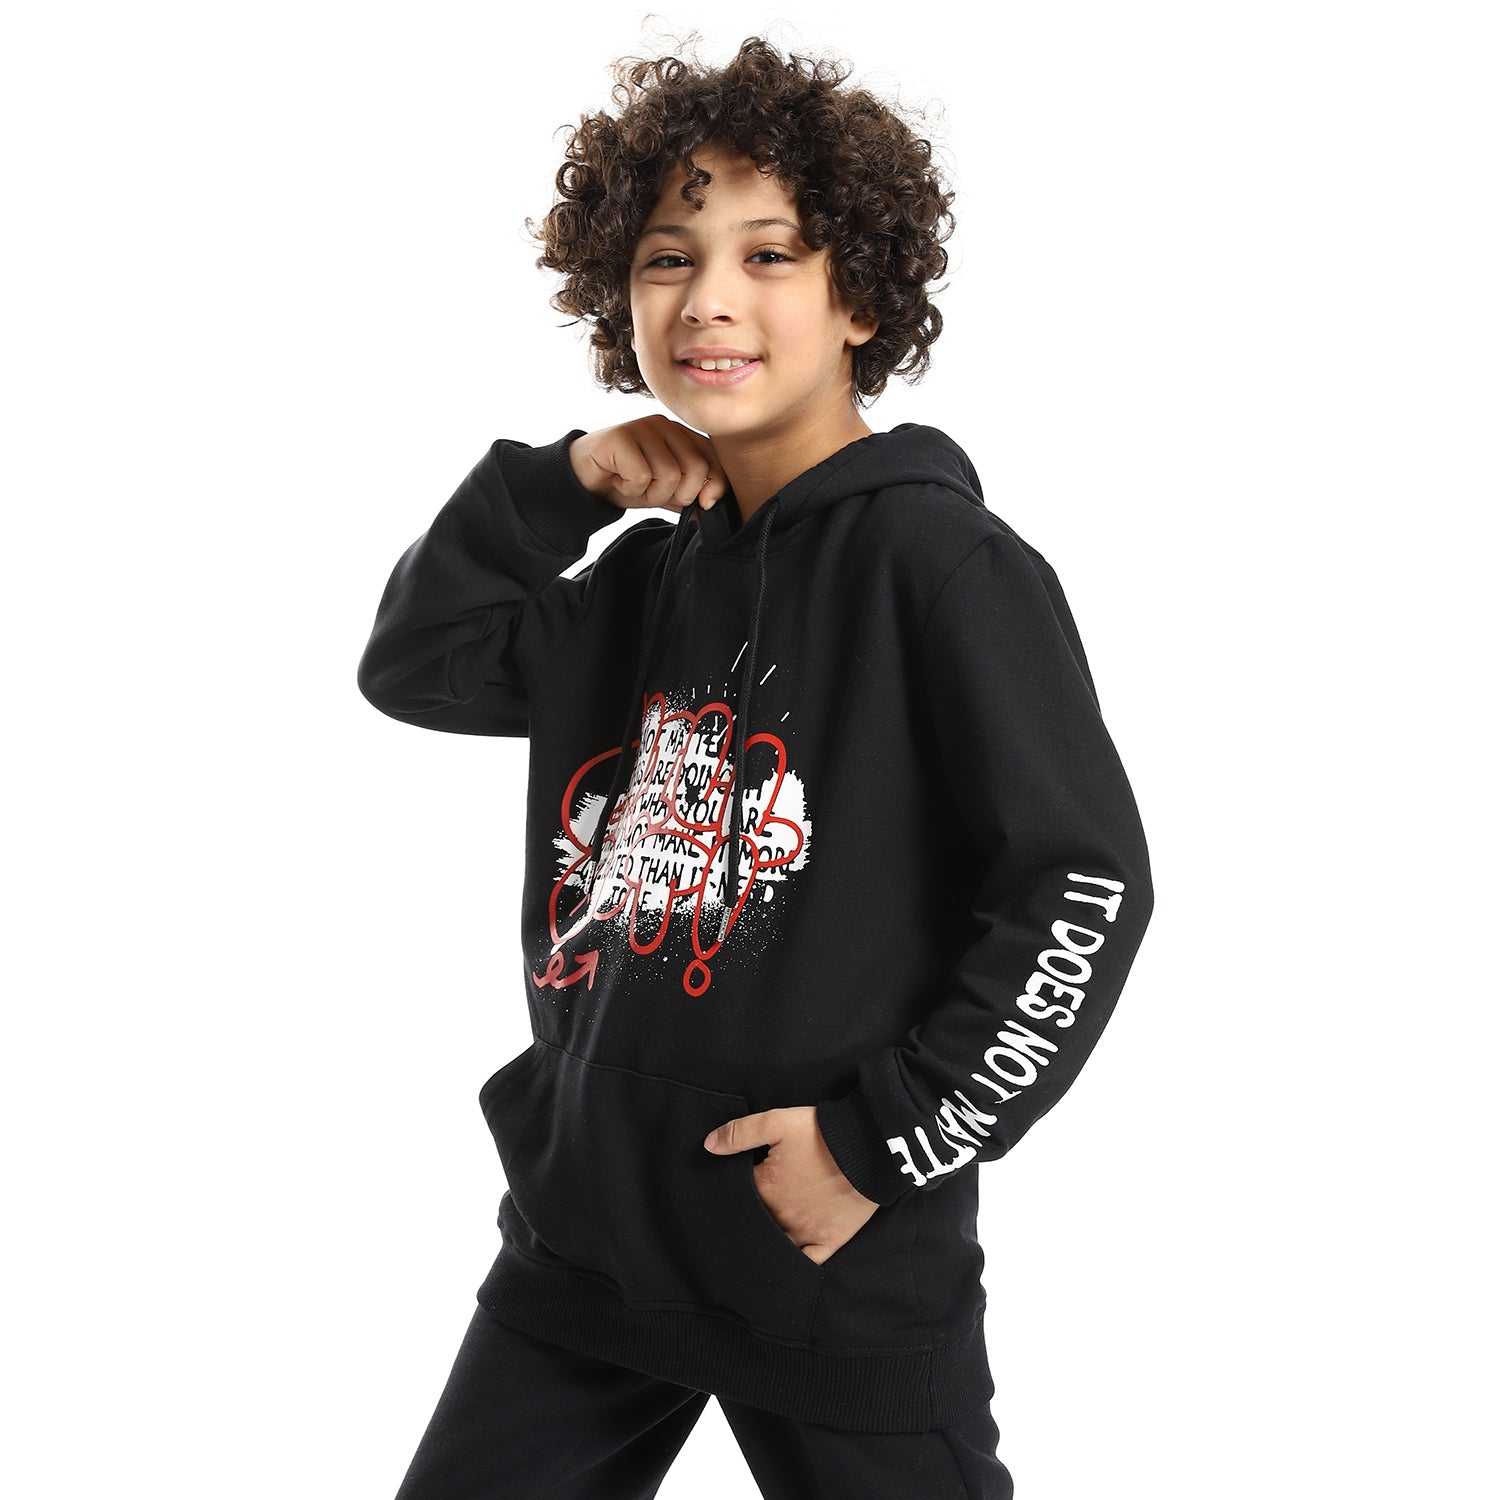 Red Cotton Boys' Black Printed Hoodie and Black Pants Set - Stylish and Cozy Loungewear"